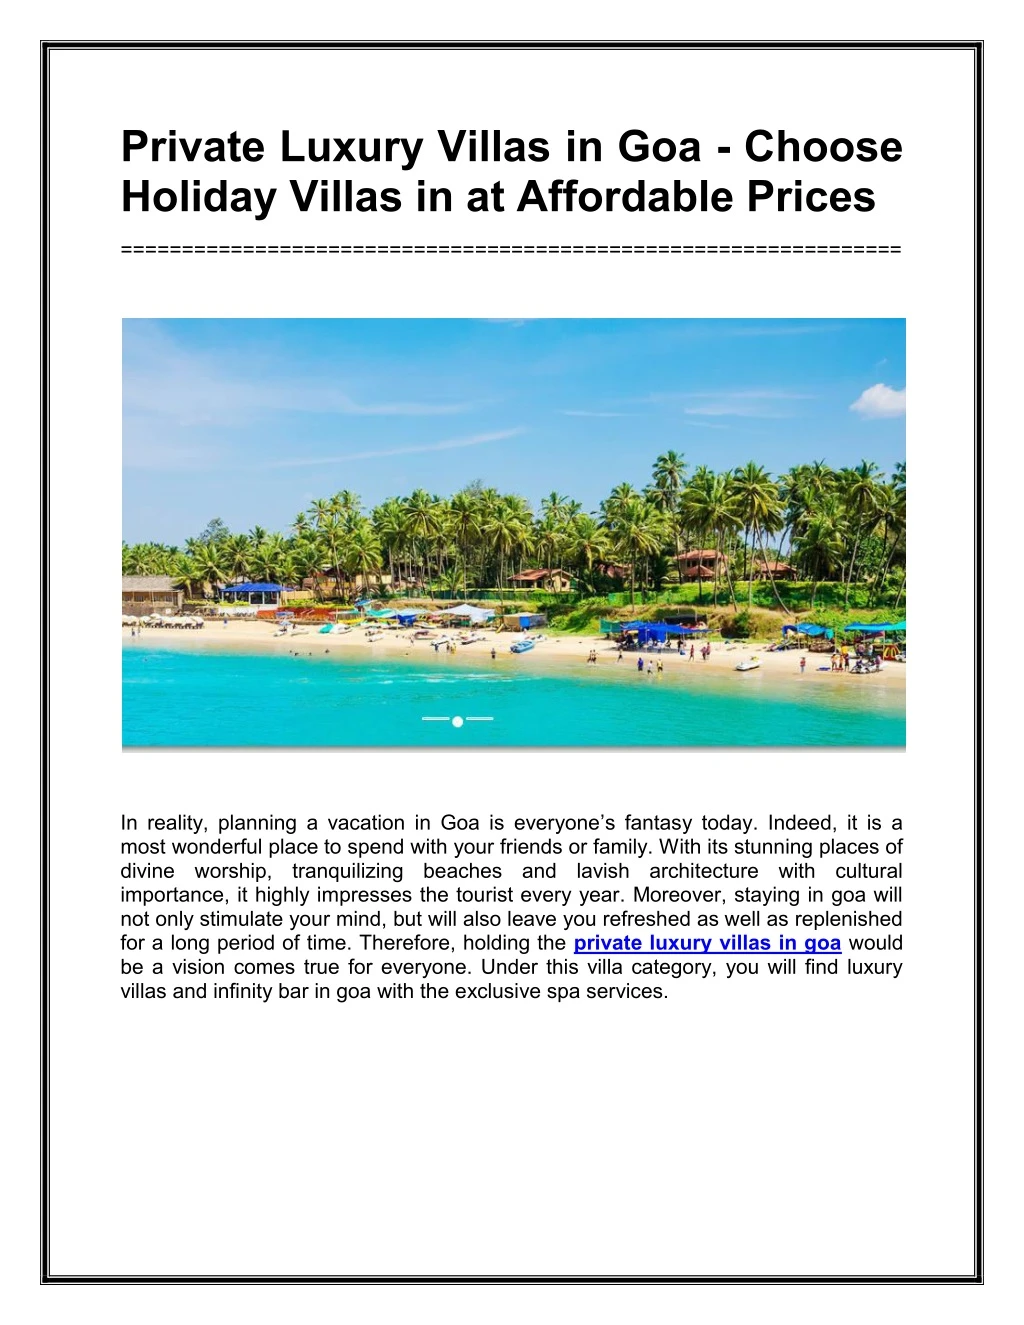 private luxury villas in goa choose holiday